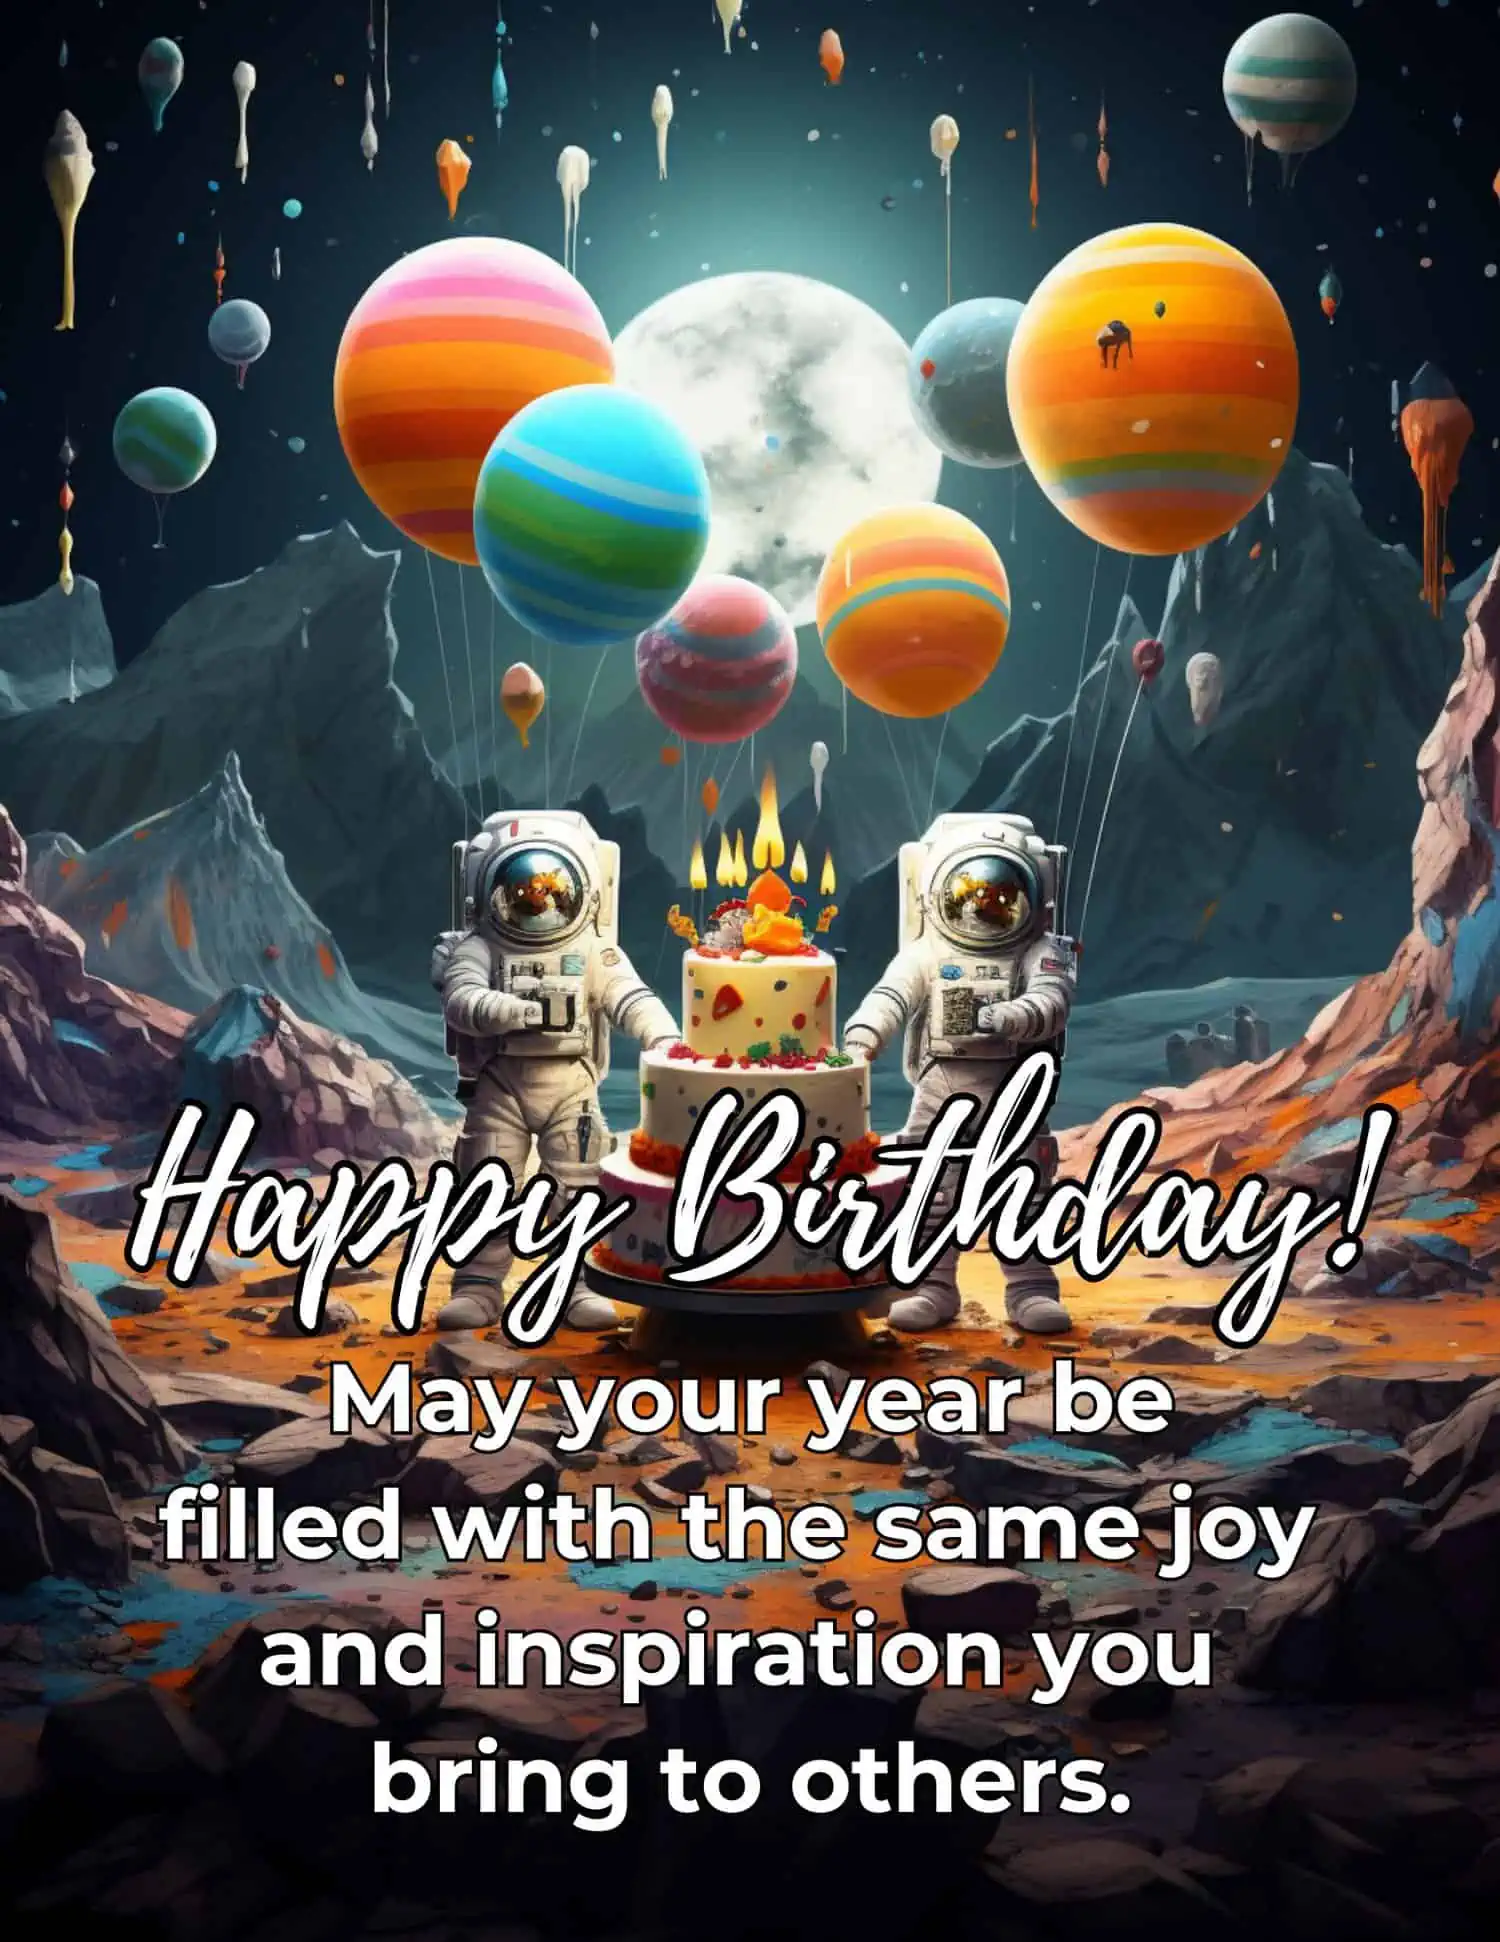 A collection of motivational and uplifting birthday wishes for uncles, celebrating their role as mentors, guides, and influential figures in our lives.